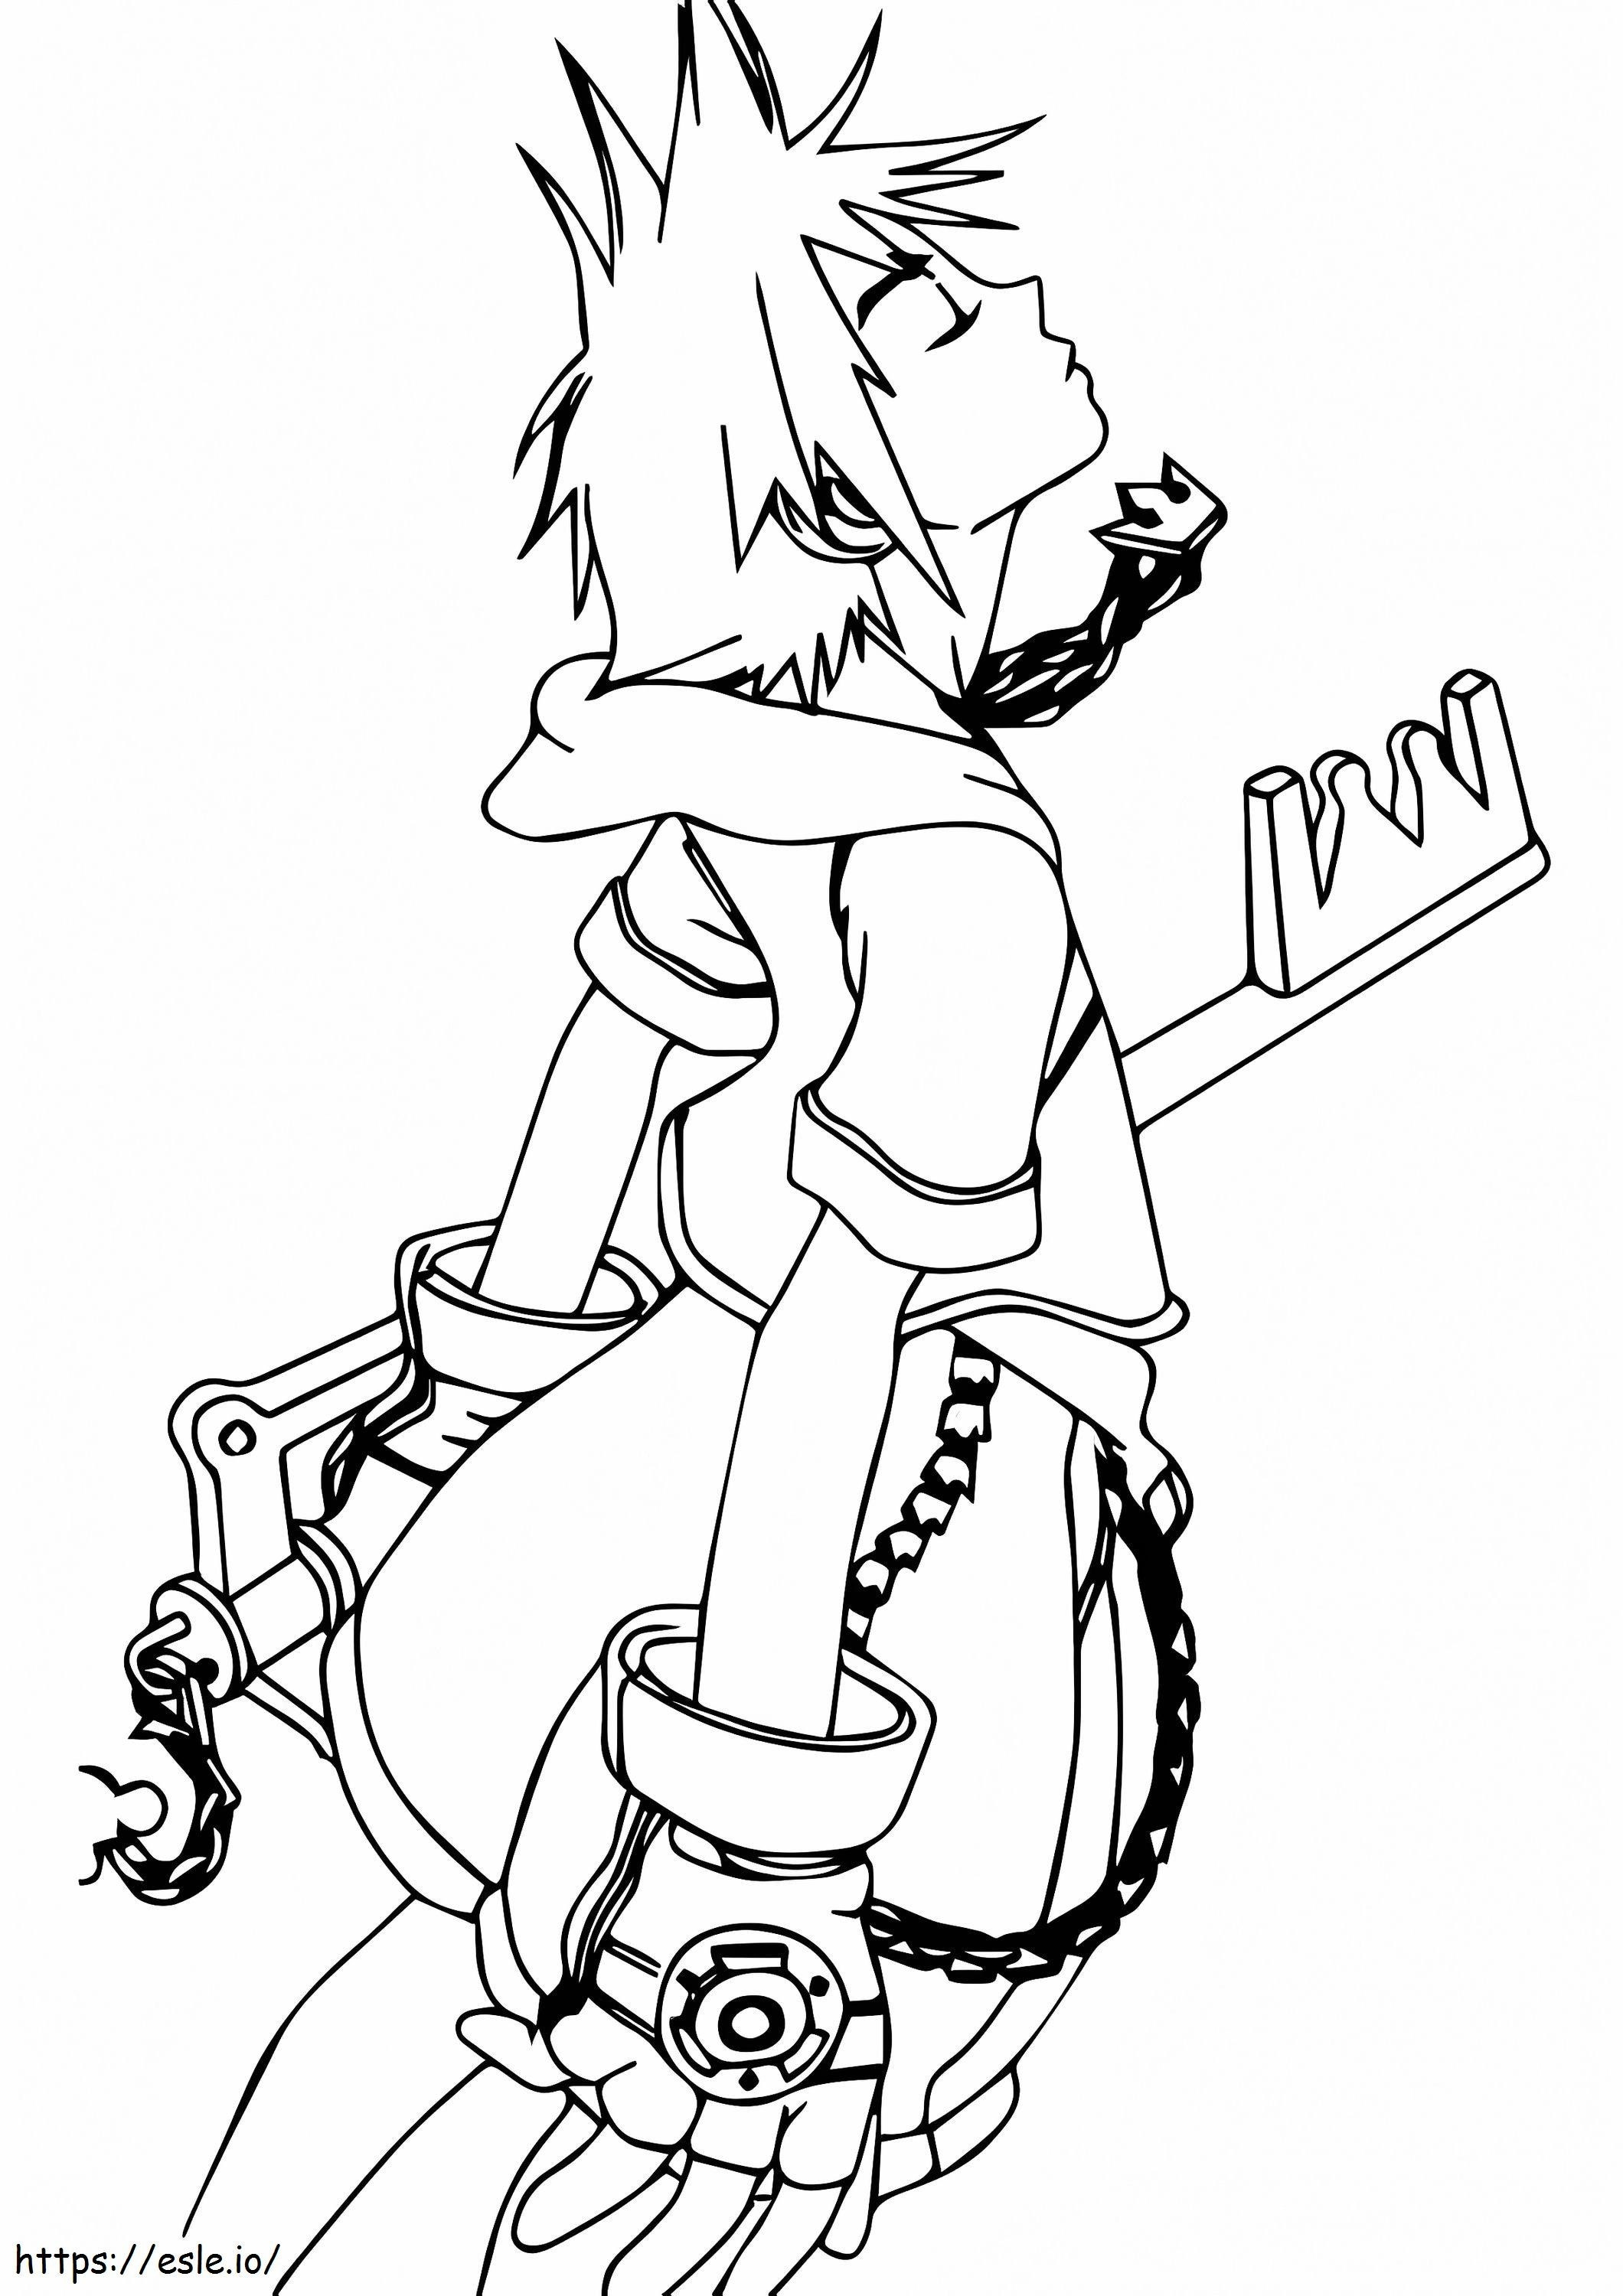 Sora With Key Blade coloring page